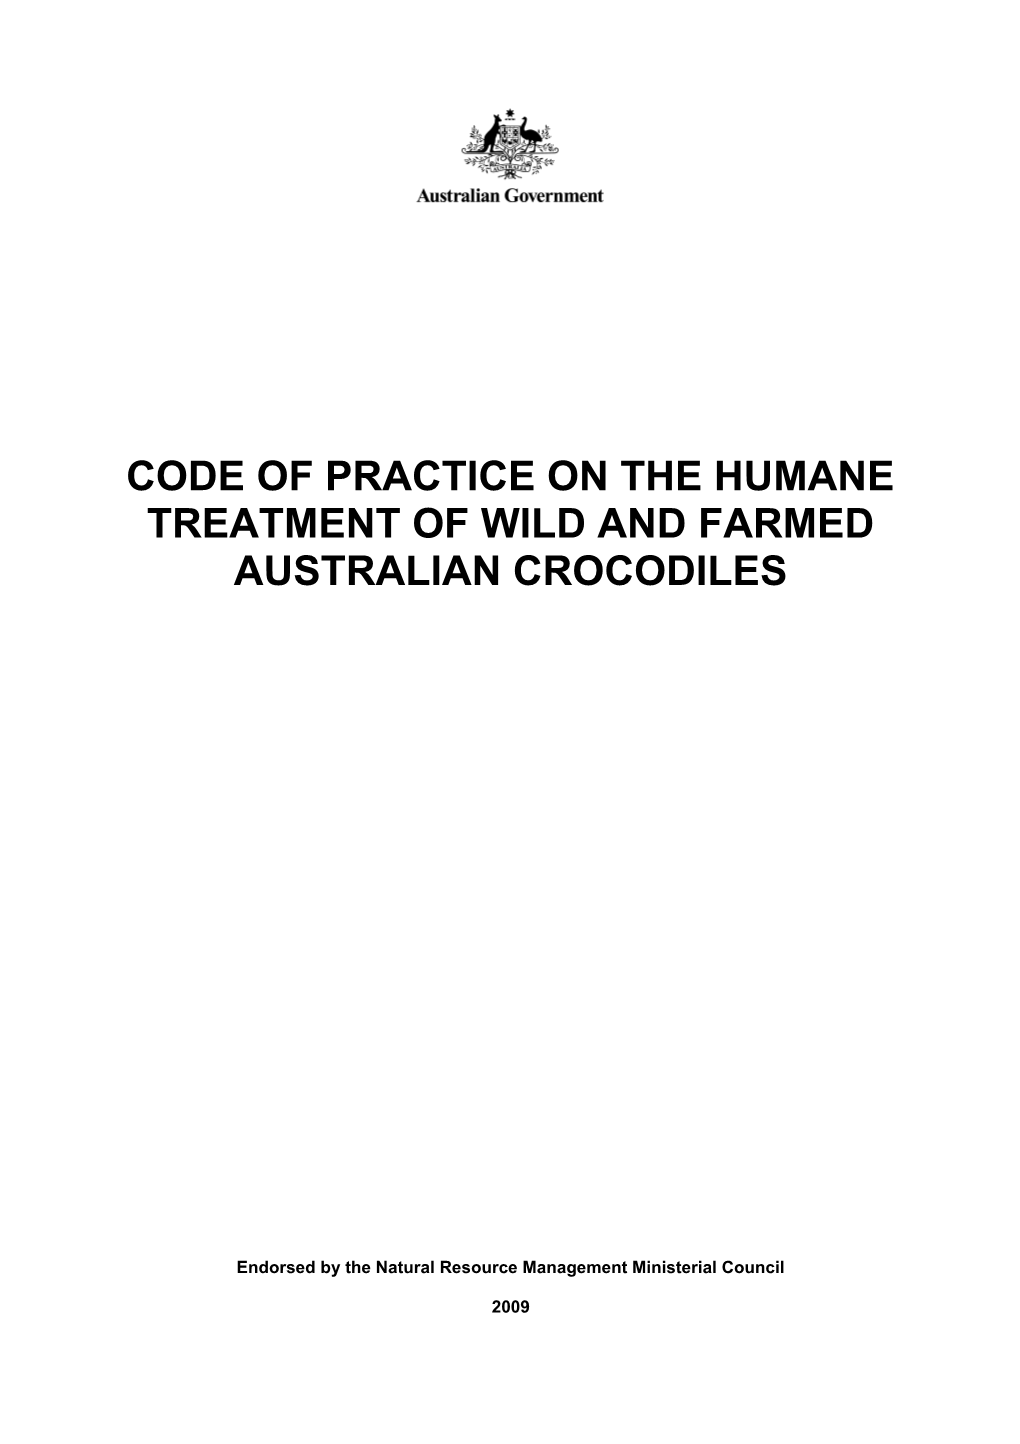 Draft Code of Practice on the Humane Killing and Treatment of Captive and Wild Australian